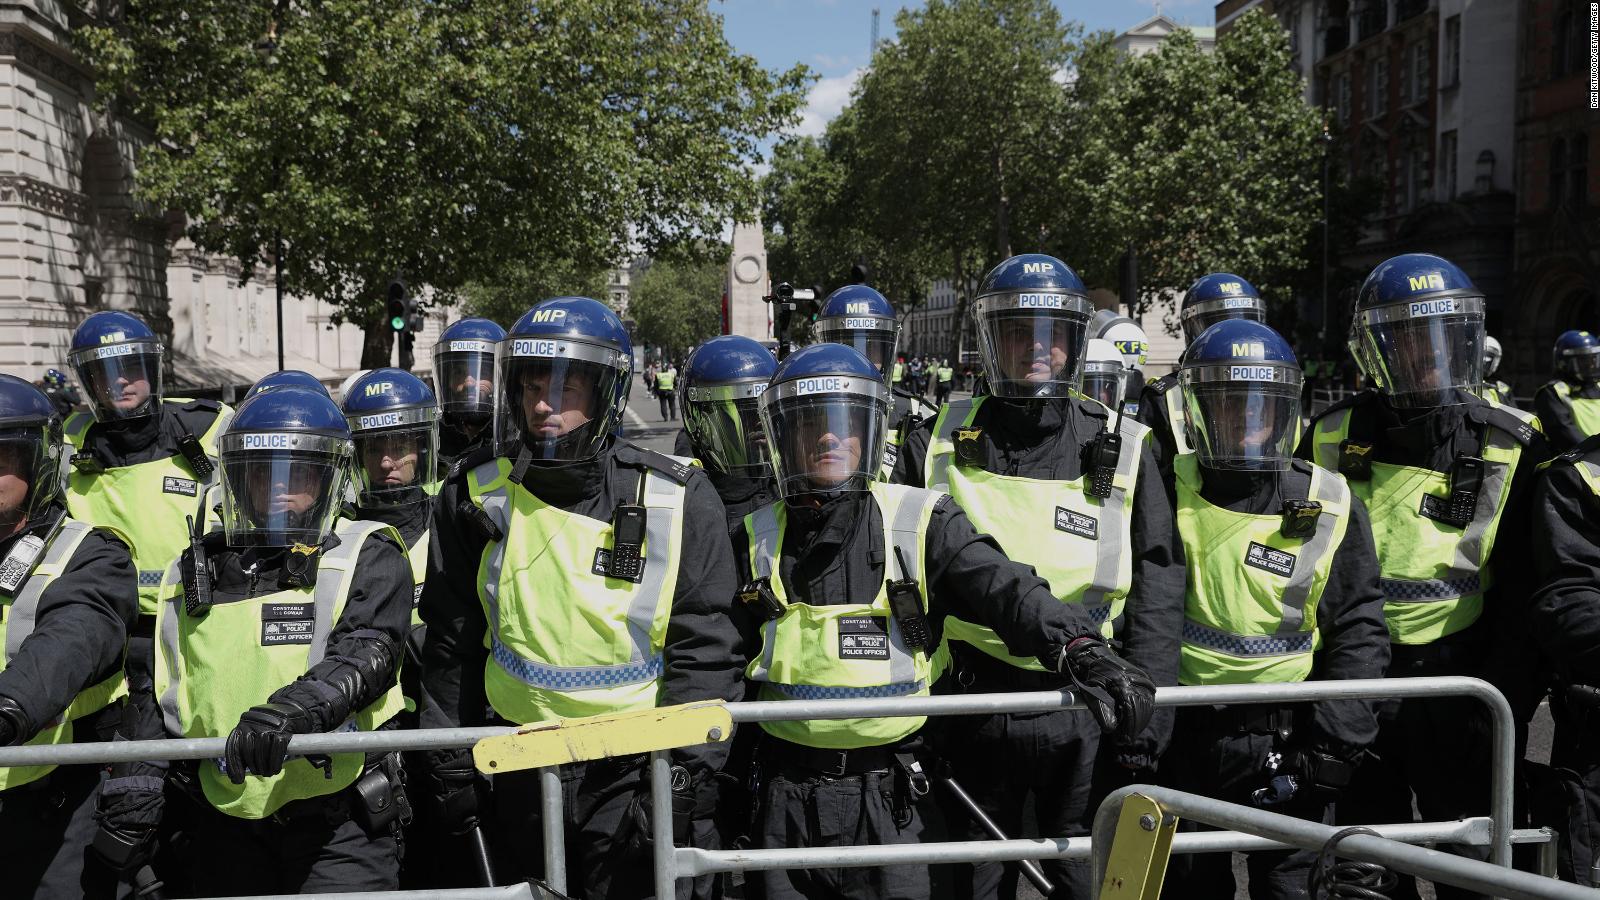 London protests Scores arrested after farright groups target anti